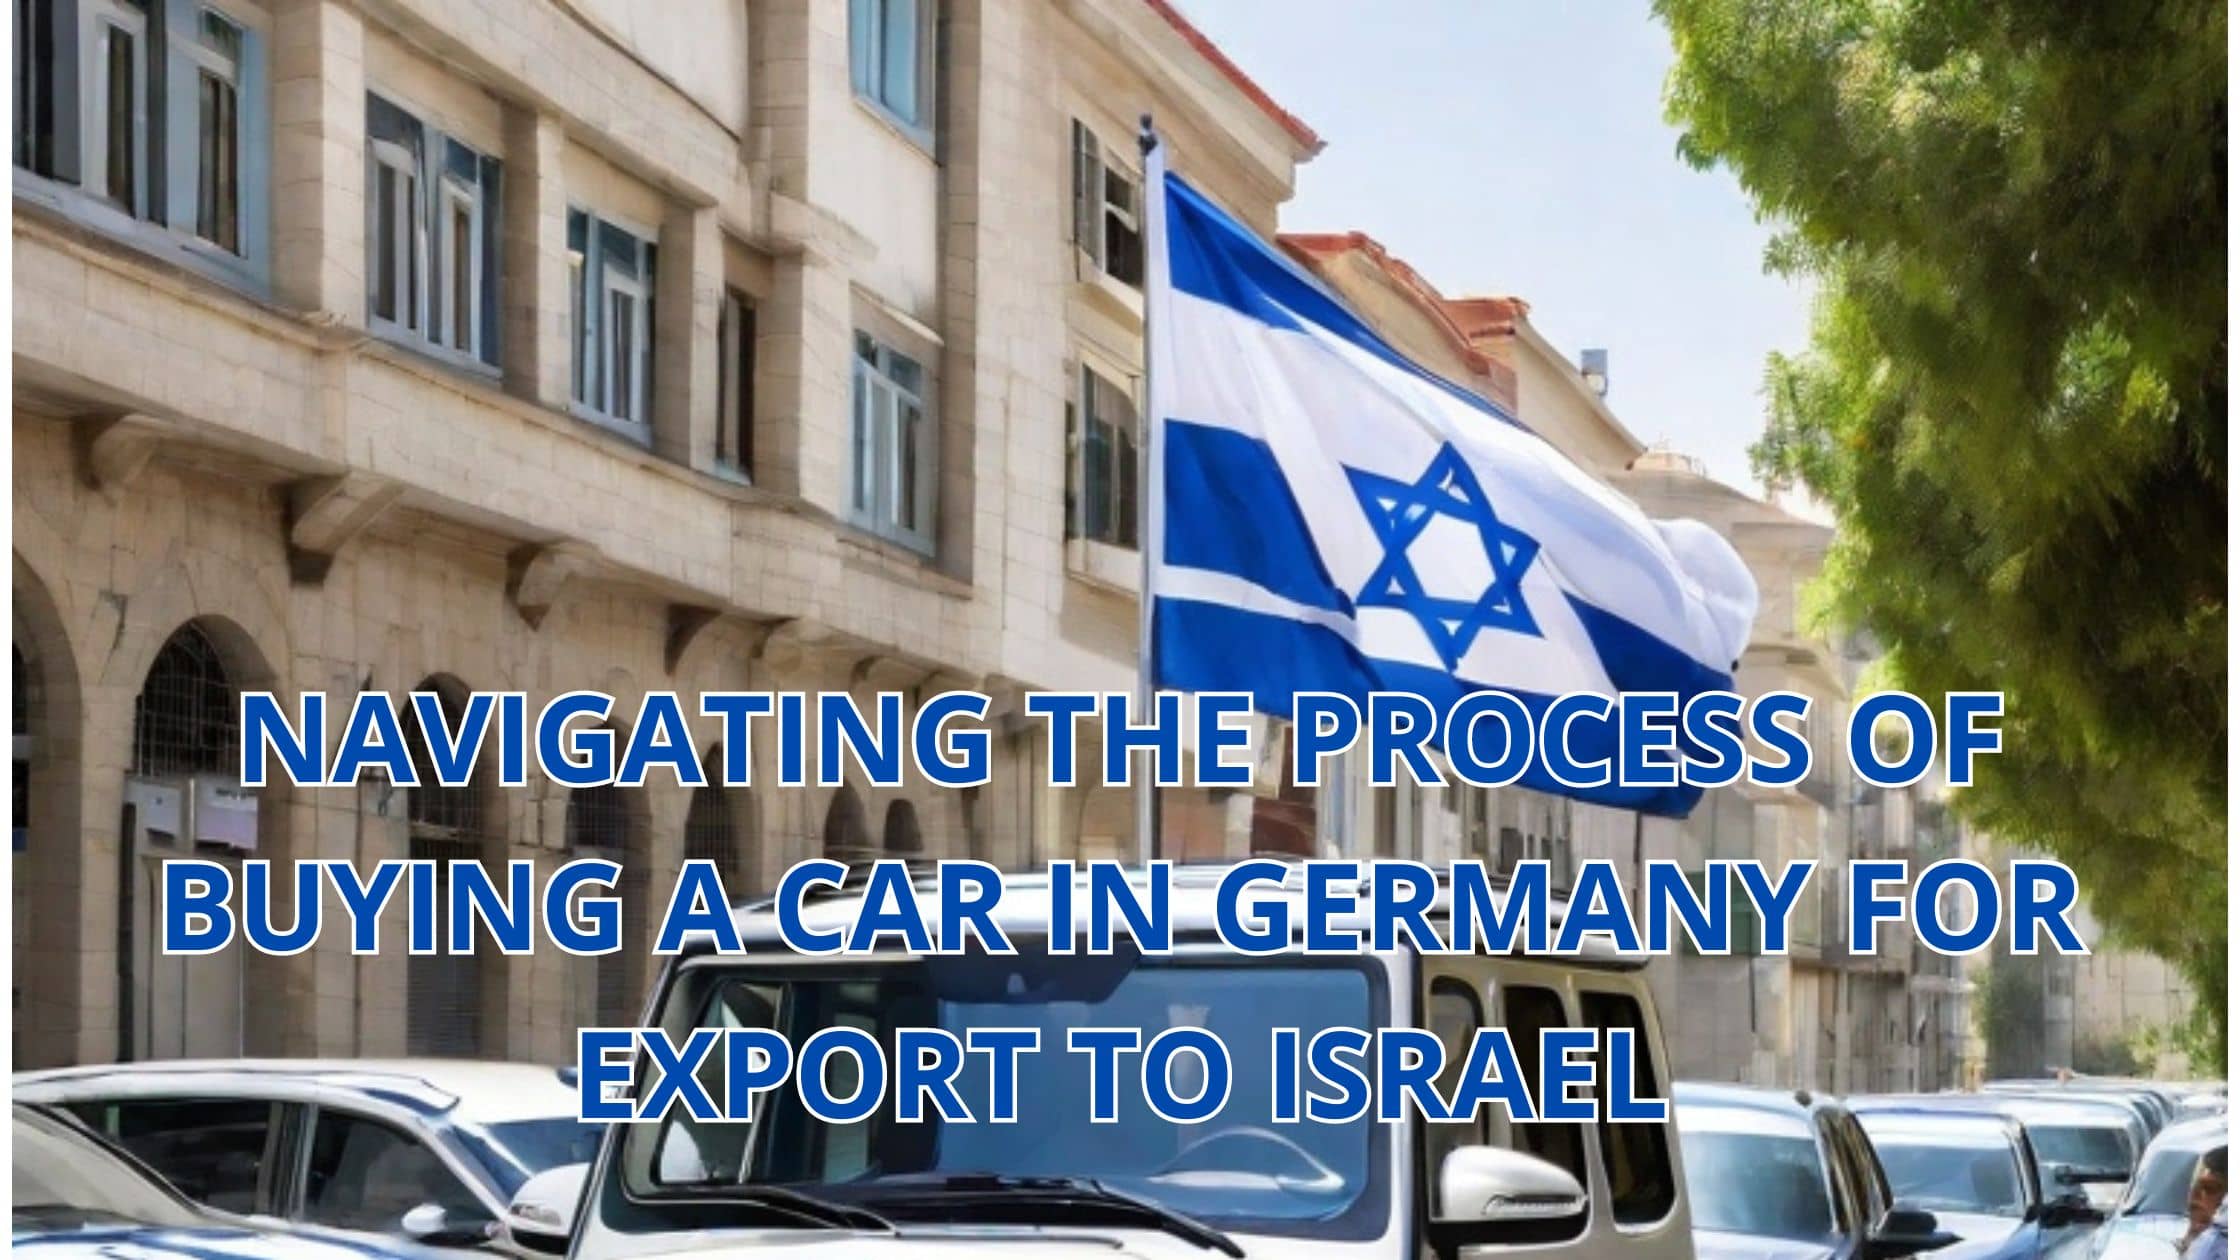 Car export from Germany to Israel